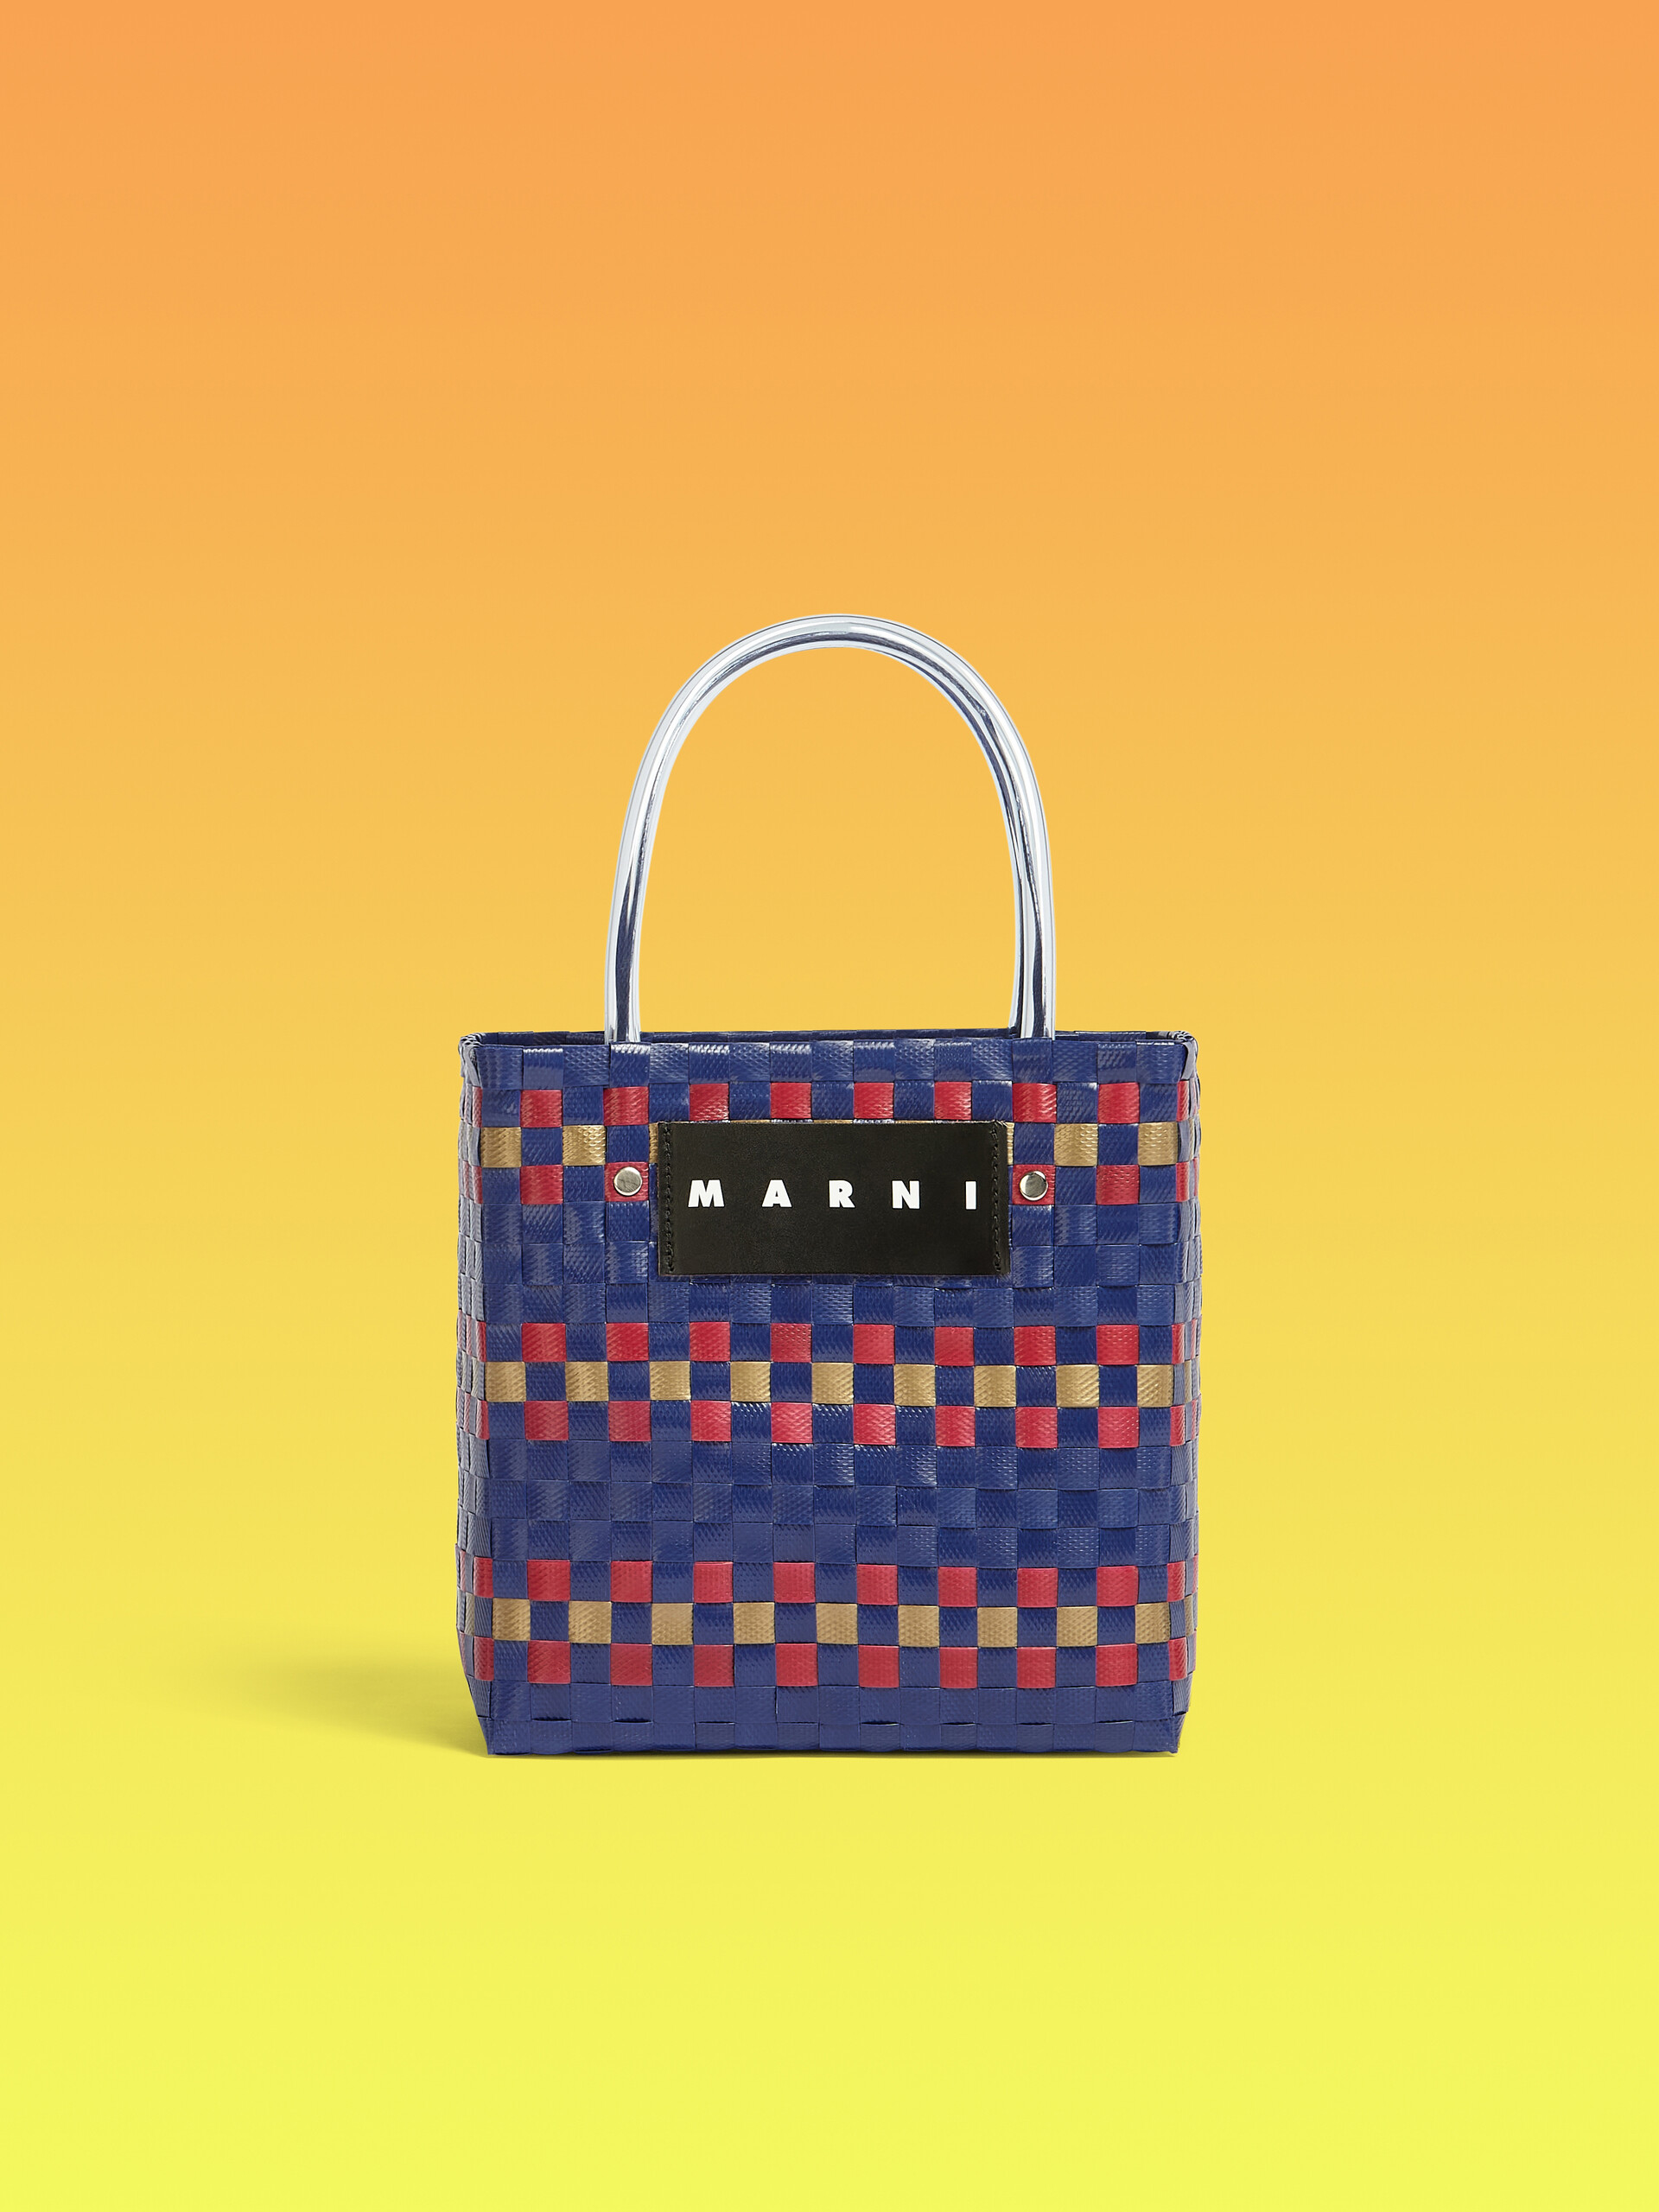 MARNI MARKET BASKET bag in blue woven material - Shopping Bags - Image 1